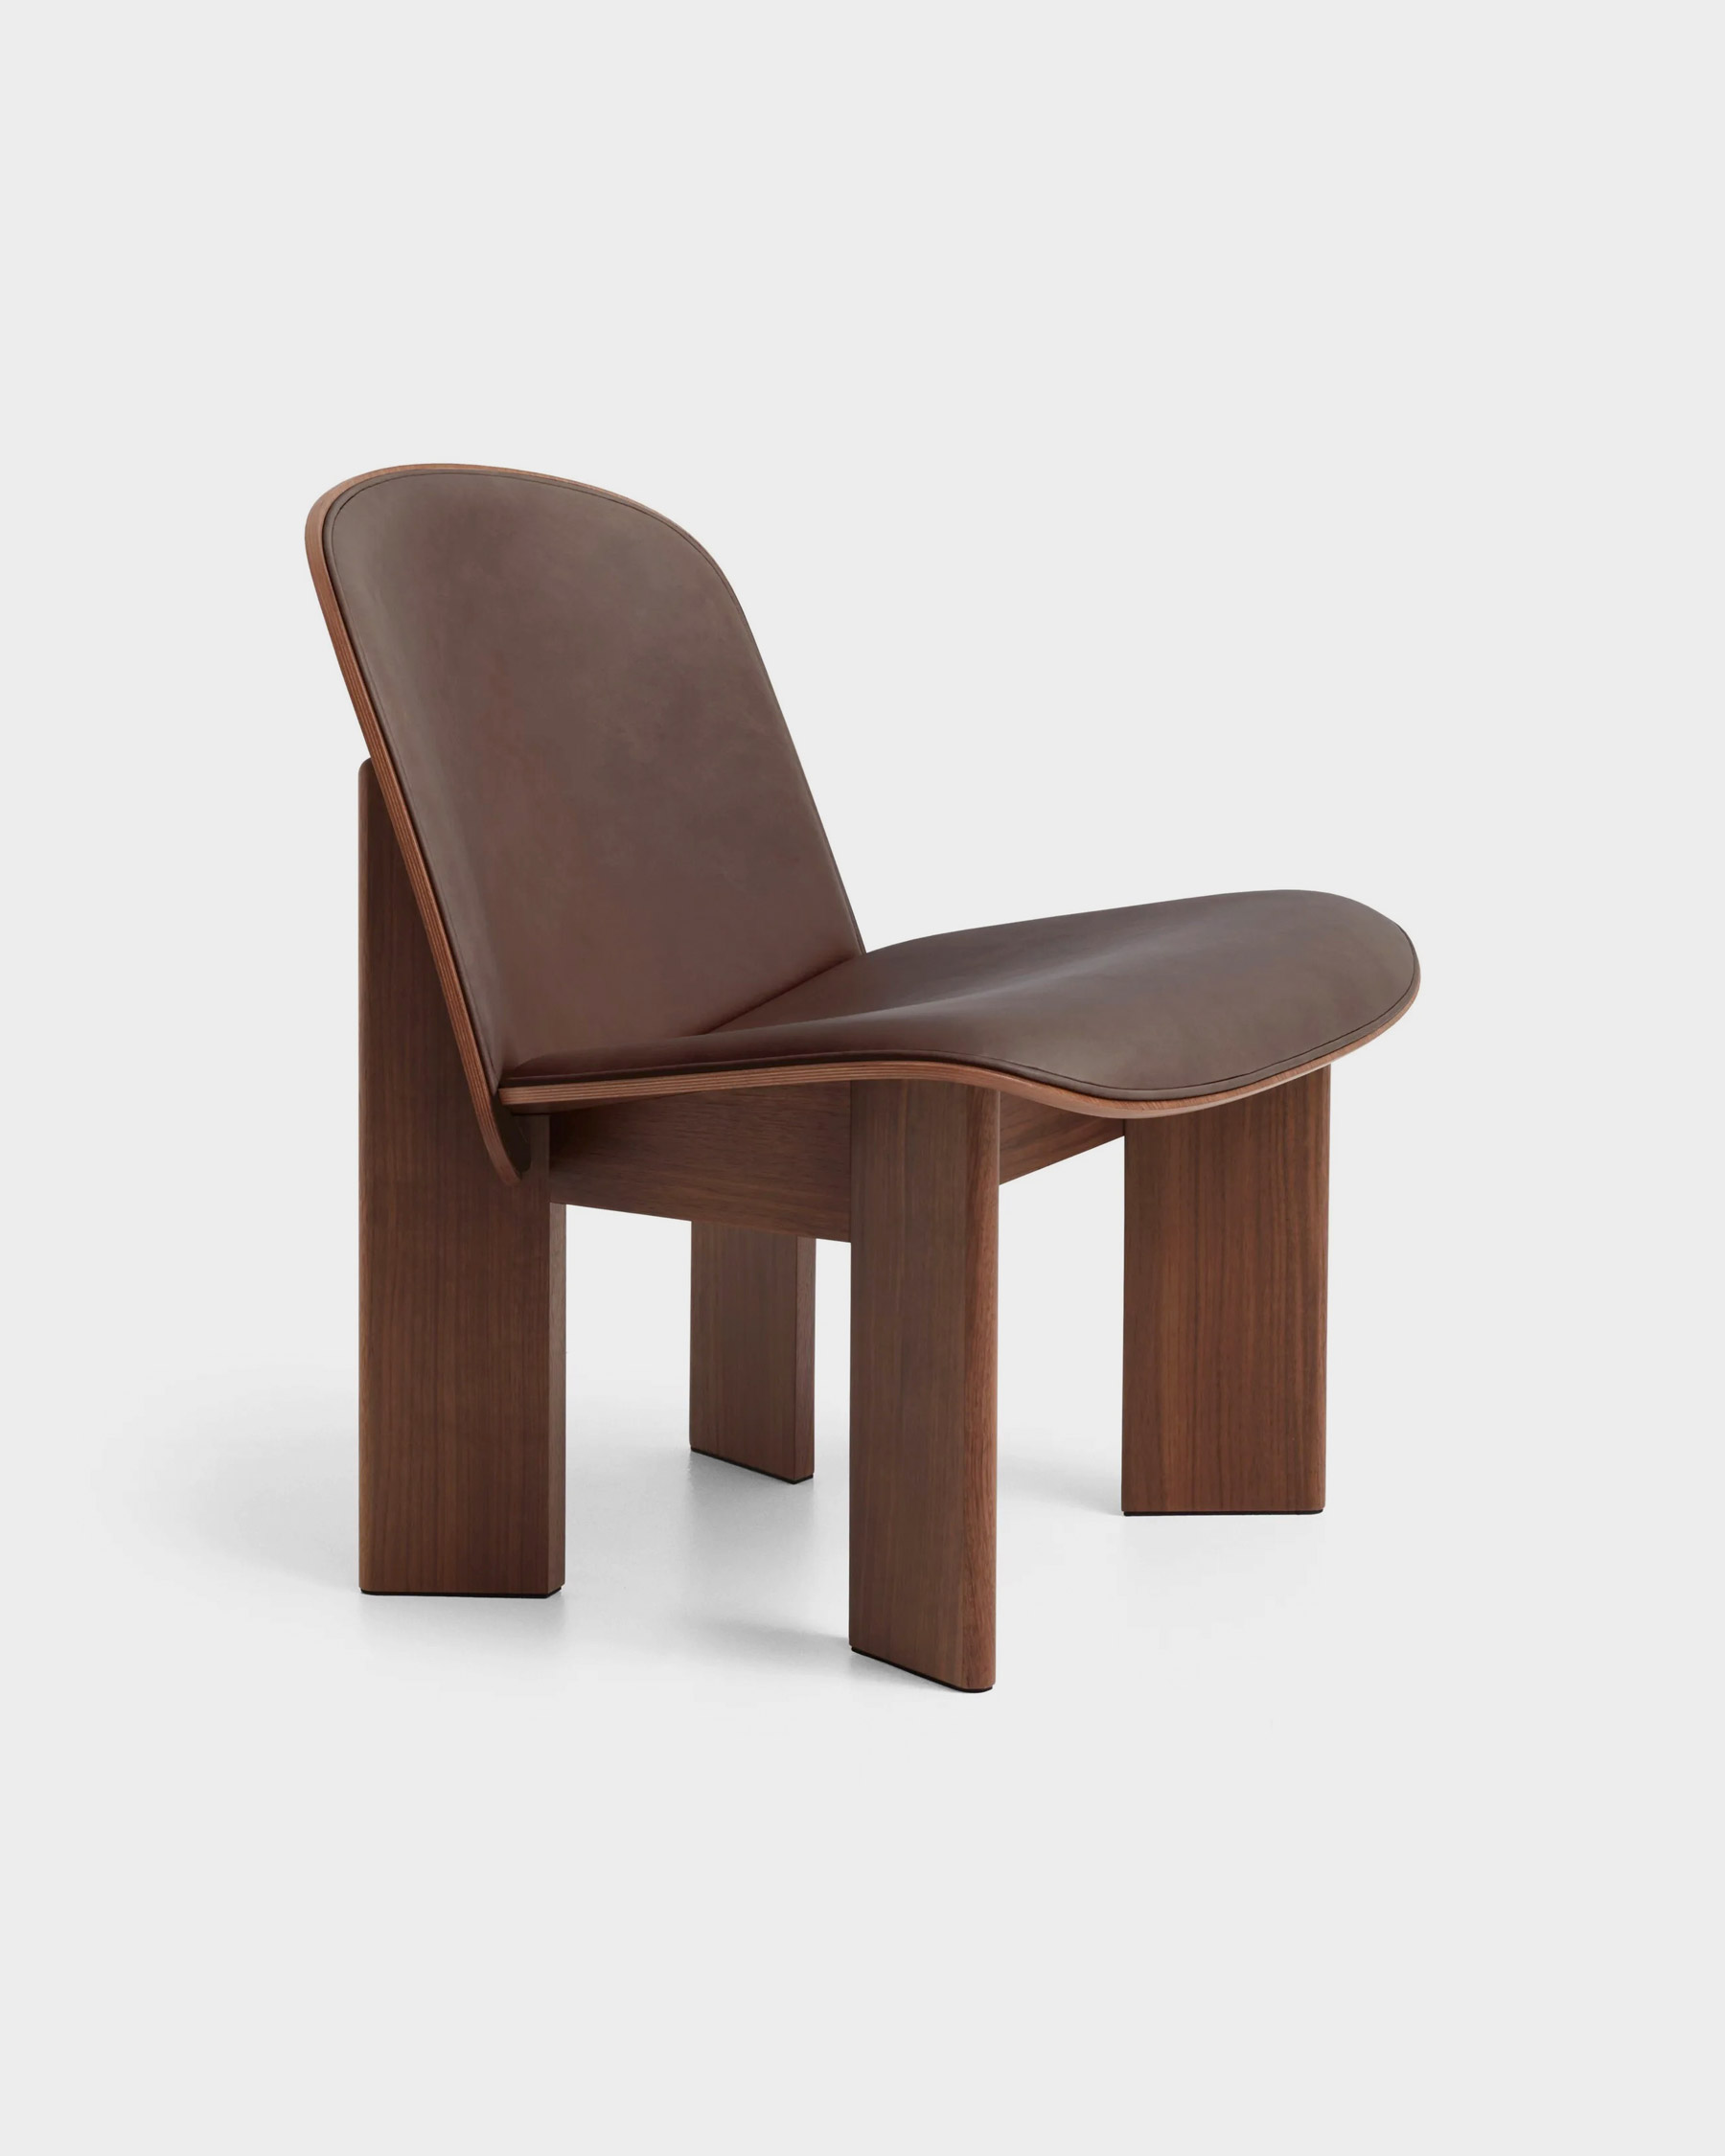 Chisel Lounge Chair designed by Andreas Bergsaker for HAY